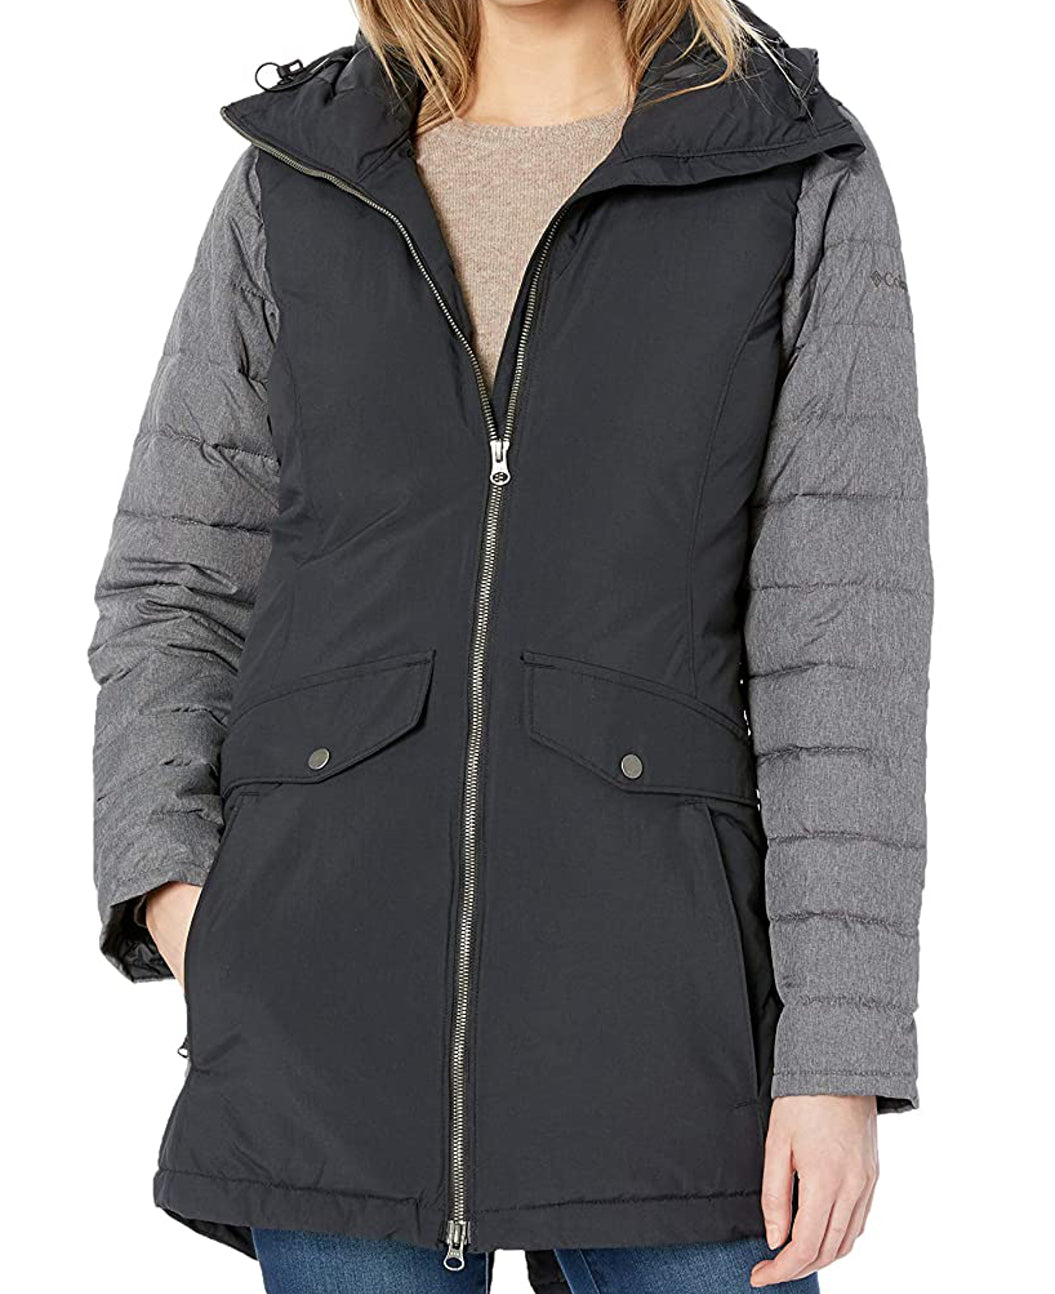 Columbia Womens Upper Avenue Insulated Hooded Jacket - image 1 of 2